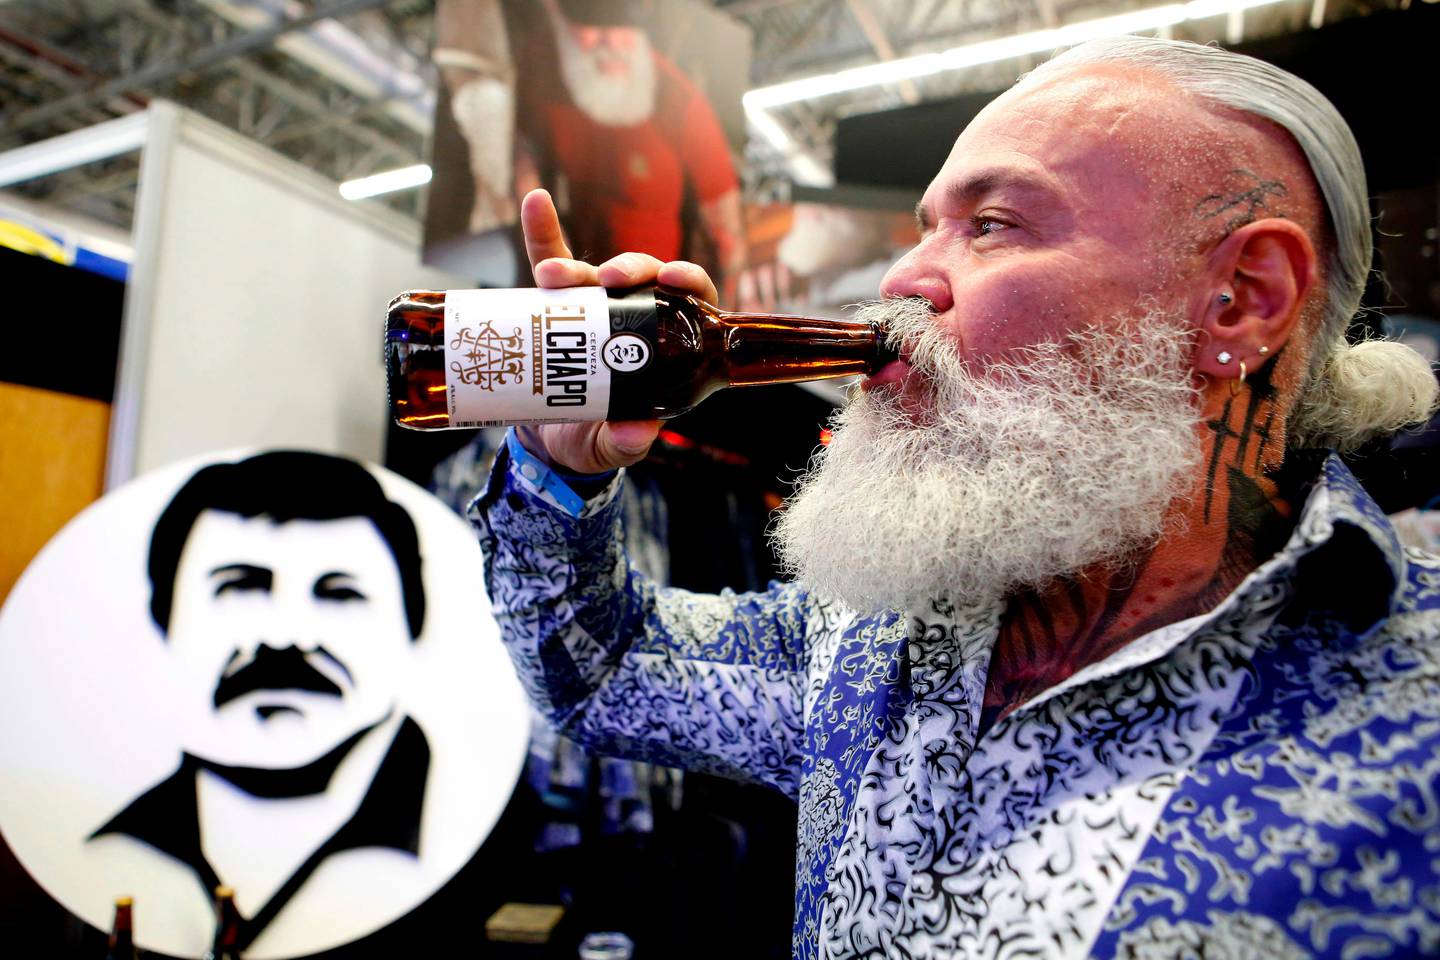 A model drinks a beer of "El Chapo 701," a line in clothing, jewelry and liquor bearing the nickname of the jailed Mexican drug lord Joaquin "El Chapo" Guzman Loera, during the 72 edition of IM Intermoda Mexico fashion fair in Guadalajara, Mexico, on January 14, 2020. (Photo by Ulises Ruiz / AFP)